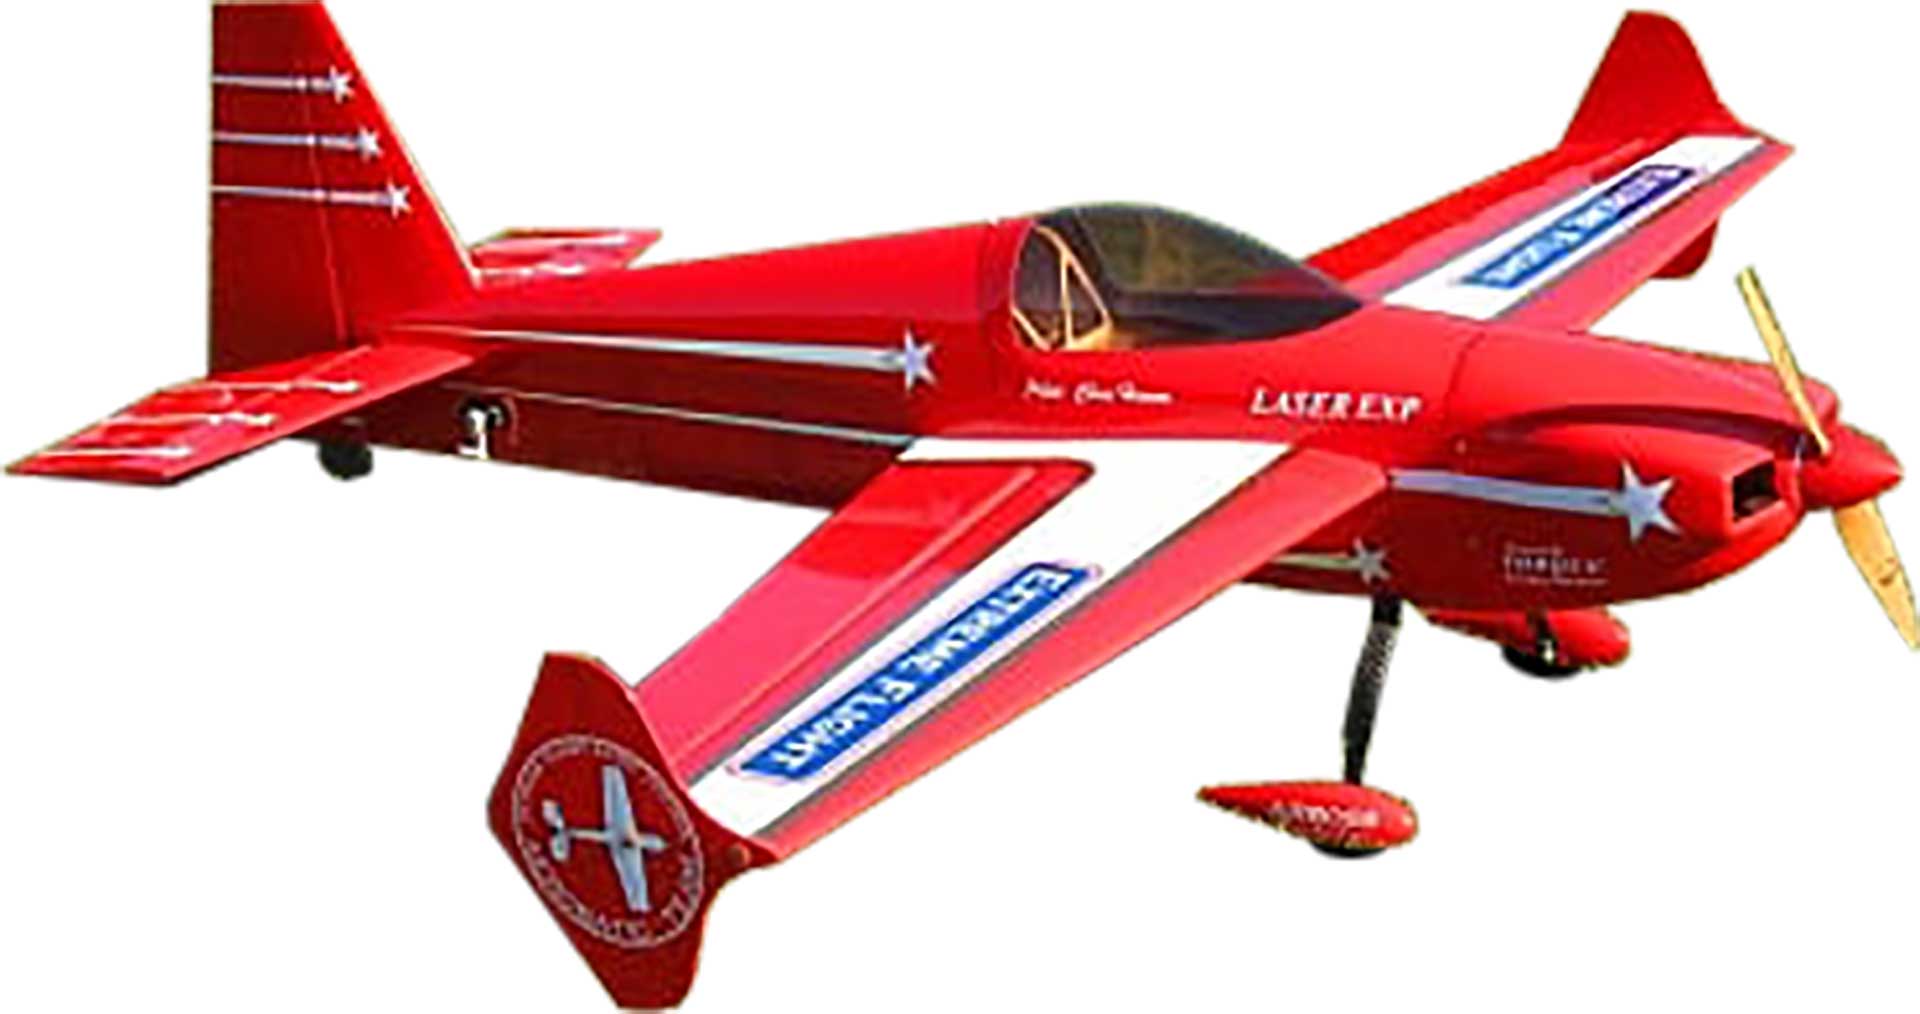 EXTREMEFLIGHT-RC LASER 60" V3 Plus Red/White RXR Receiver ready ( receiver "ready" )with wing quick-release fastener